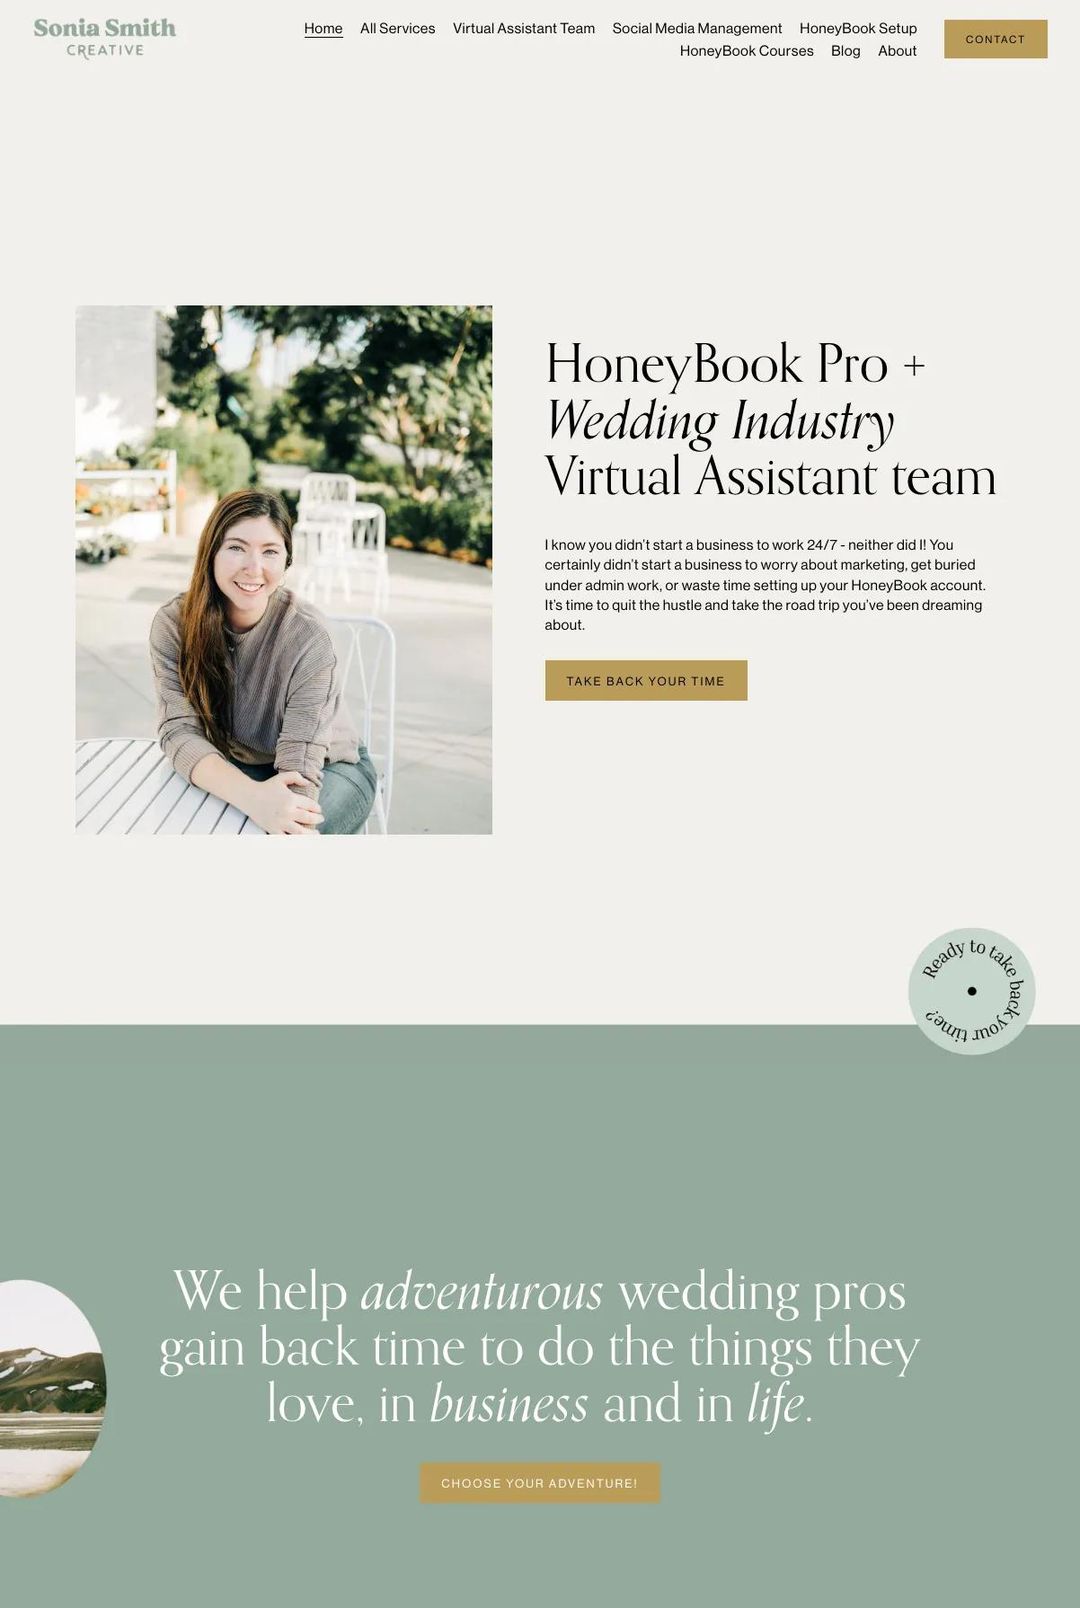 Screenshot 1 of Sonia Smith Creative (Example Squarespace Virtual Assistant Website)